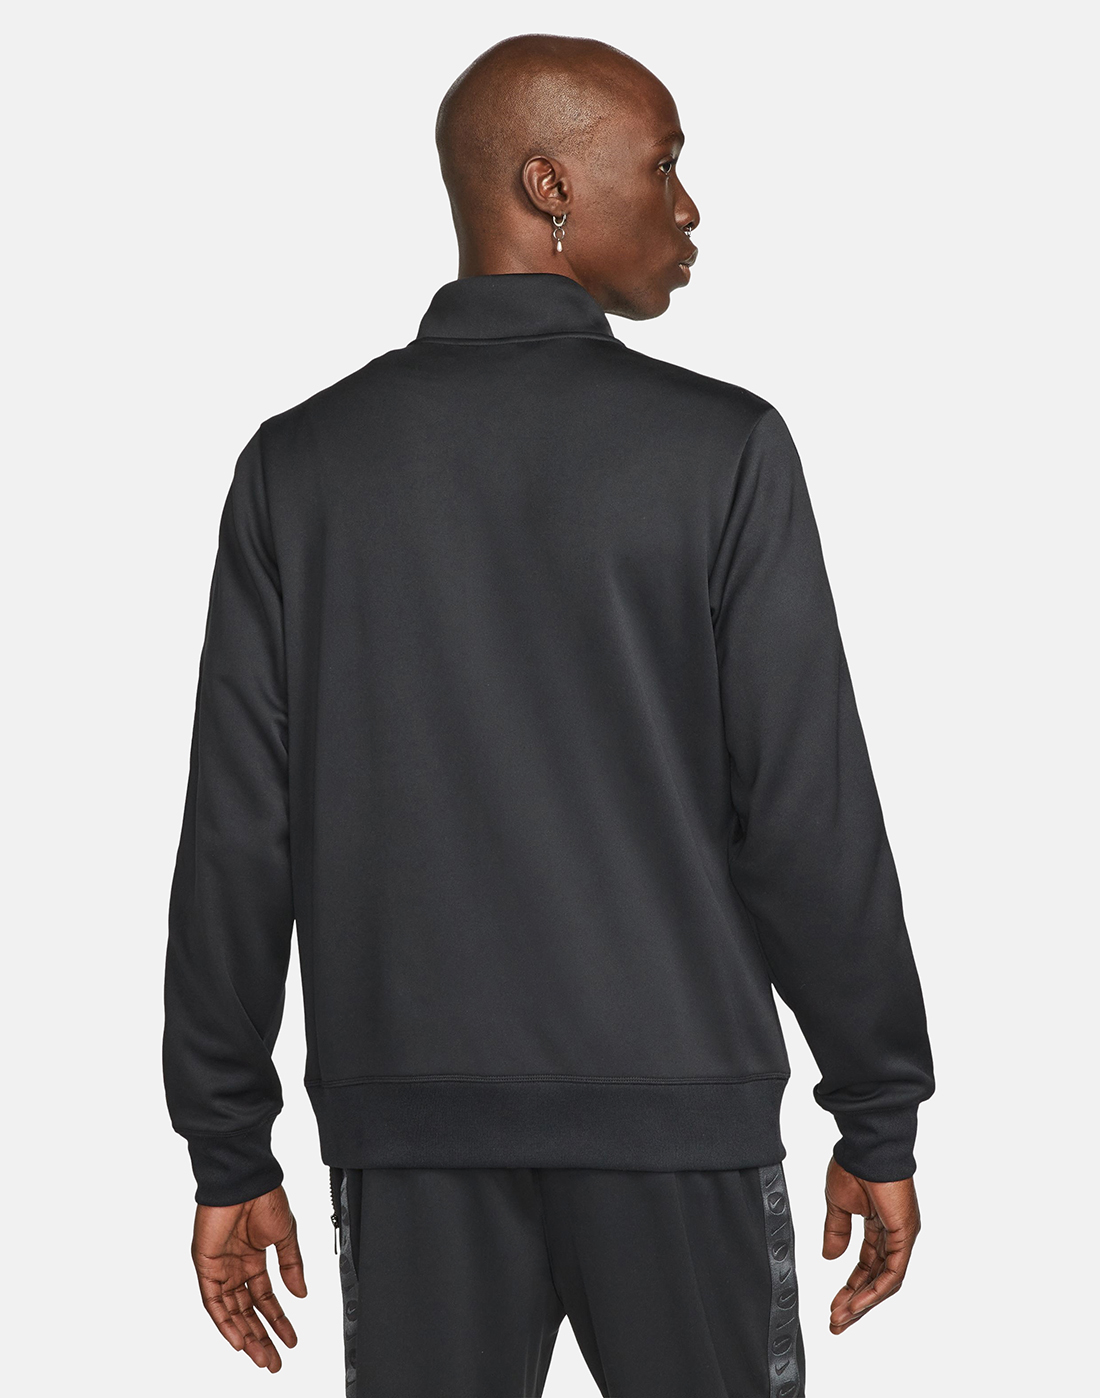 Nike Mens Swoosh Poly Track Top - Black | Life Style Sports IE